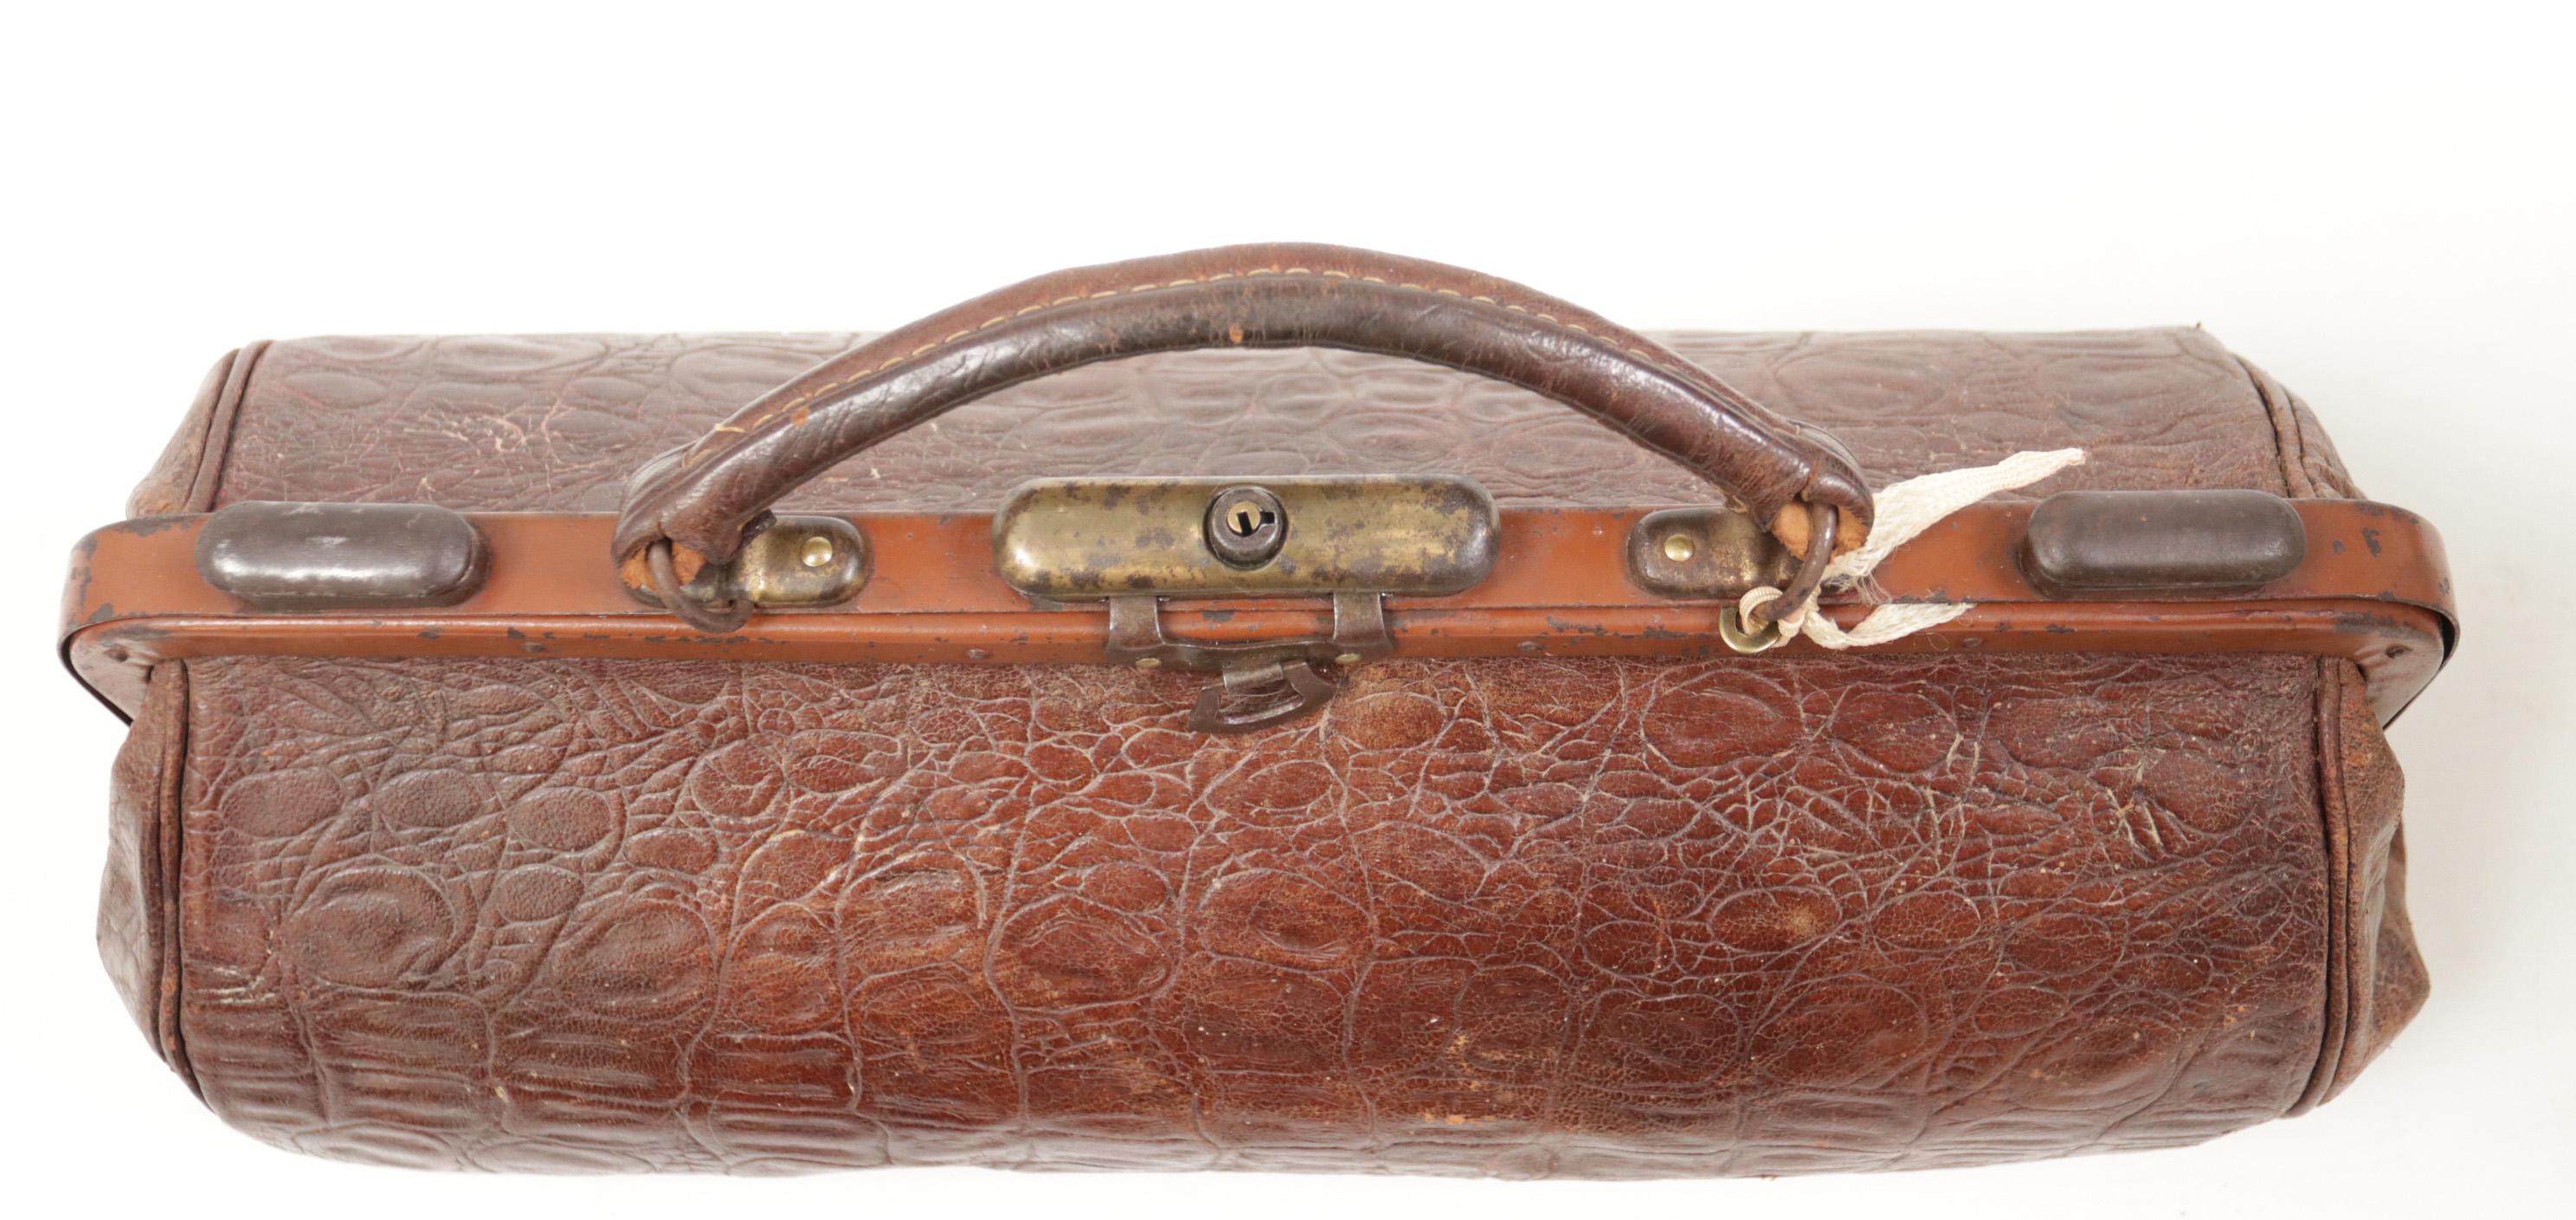 French Art Deco Embossed Crocodile Leather Doctor’s Bag, c. 1920 For Sale 5